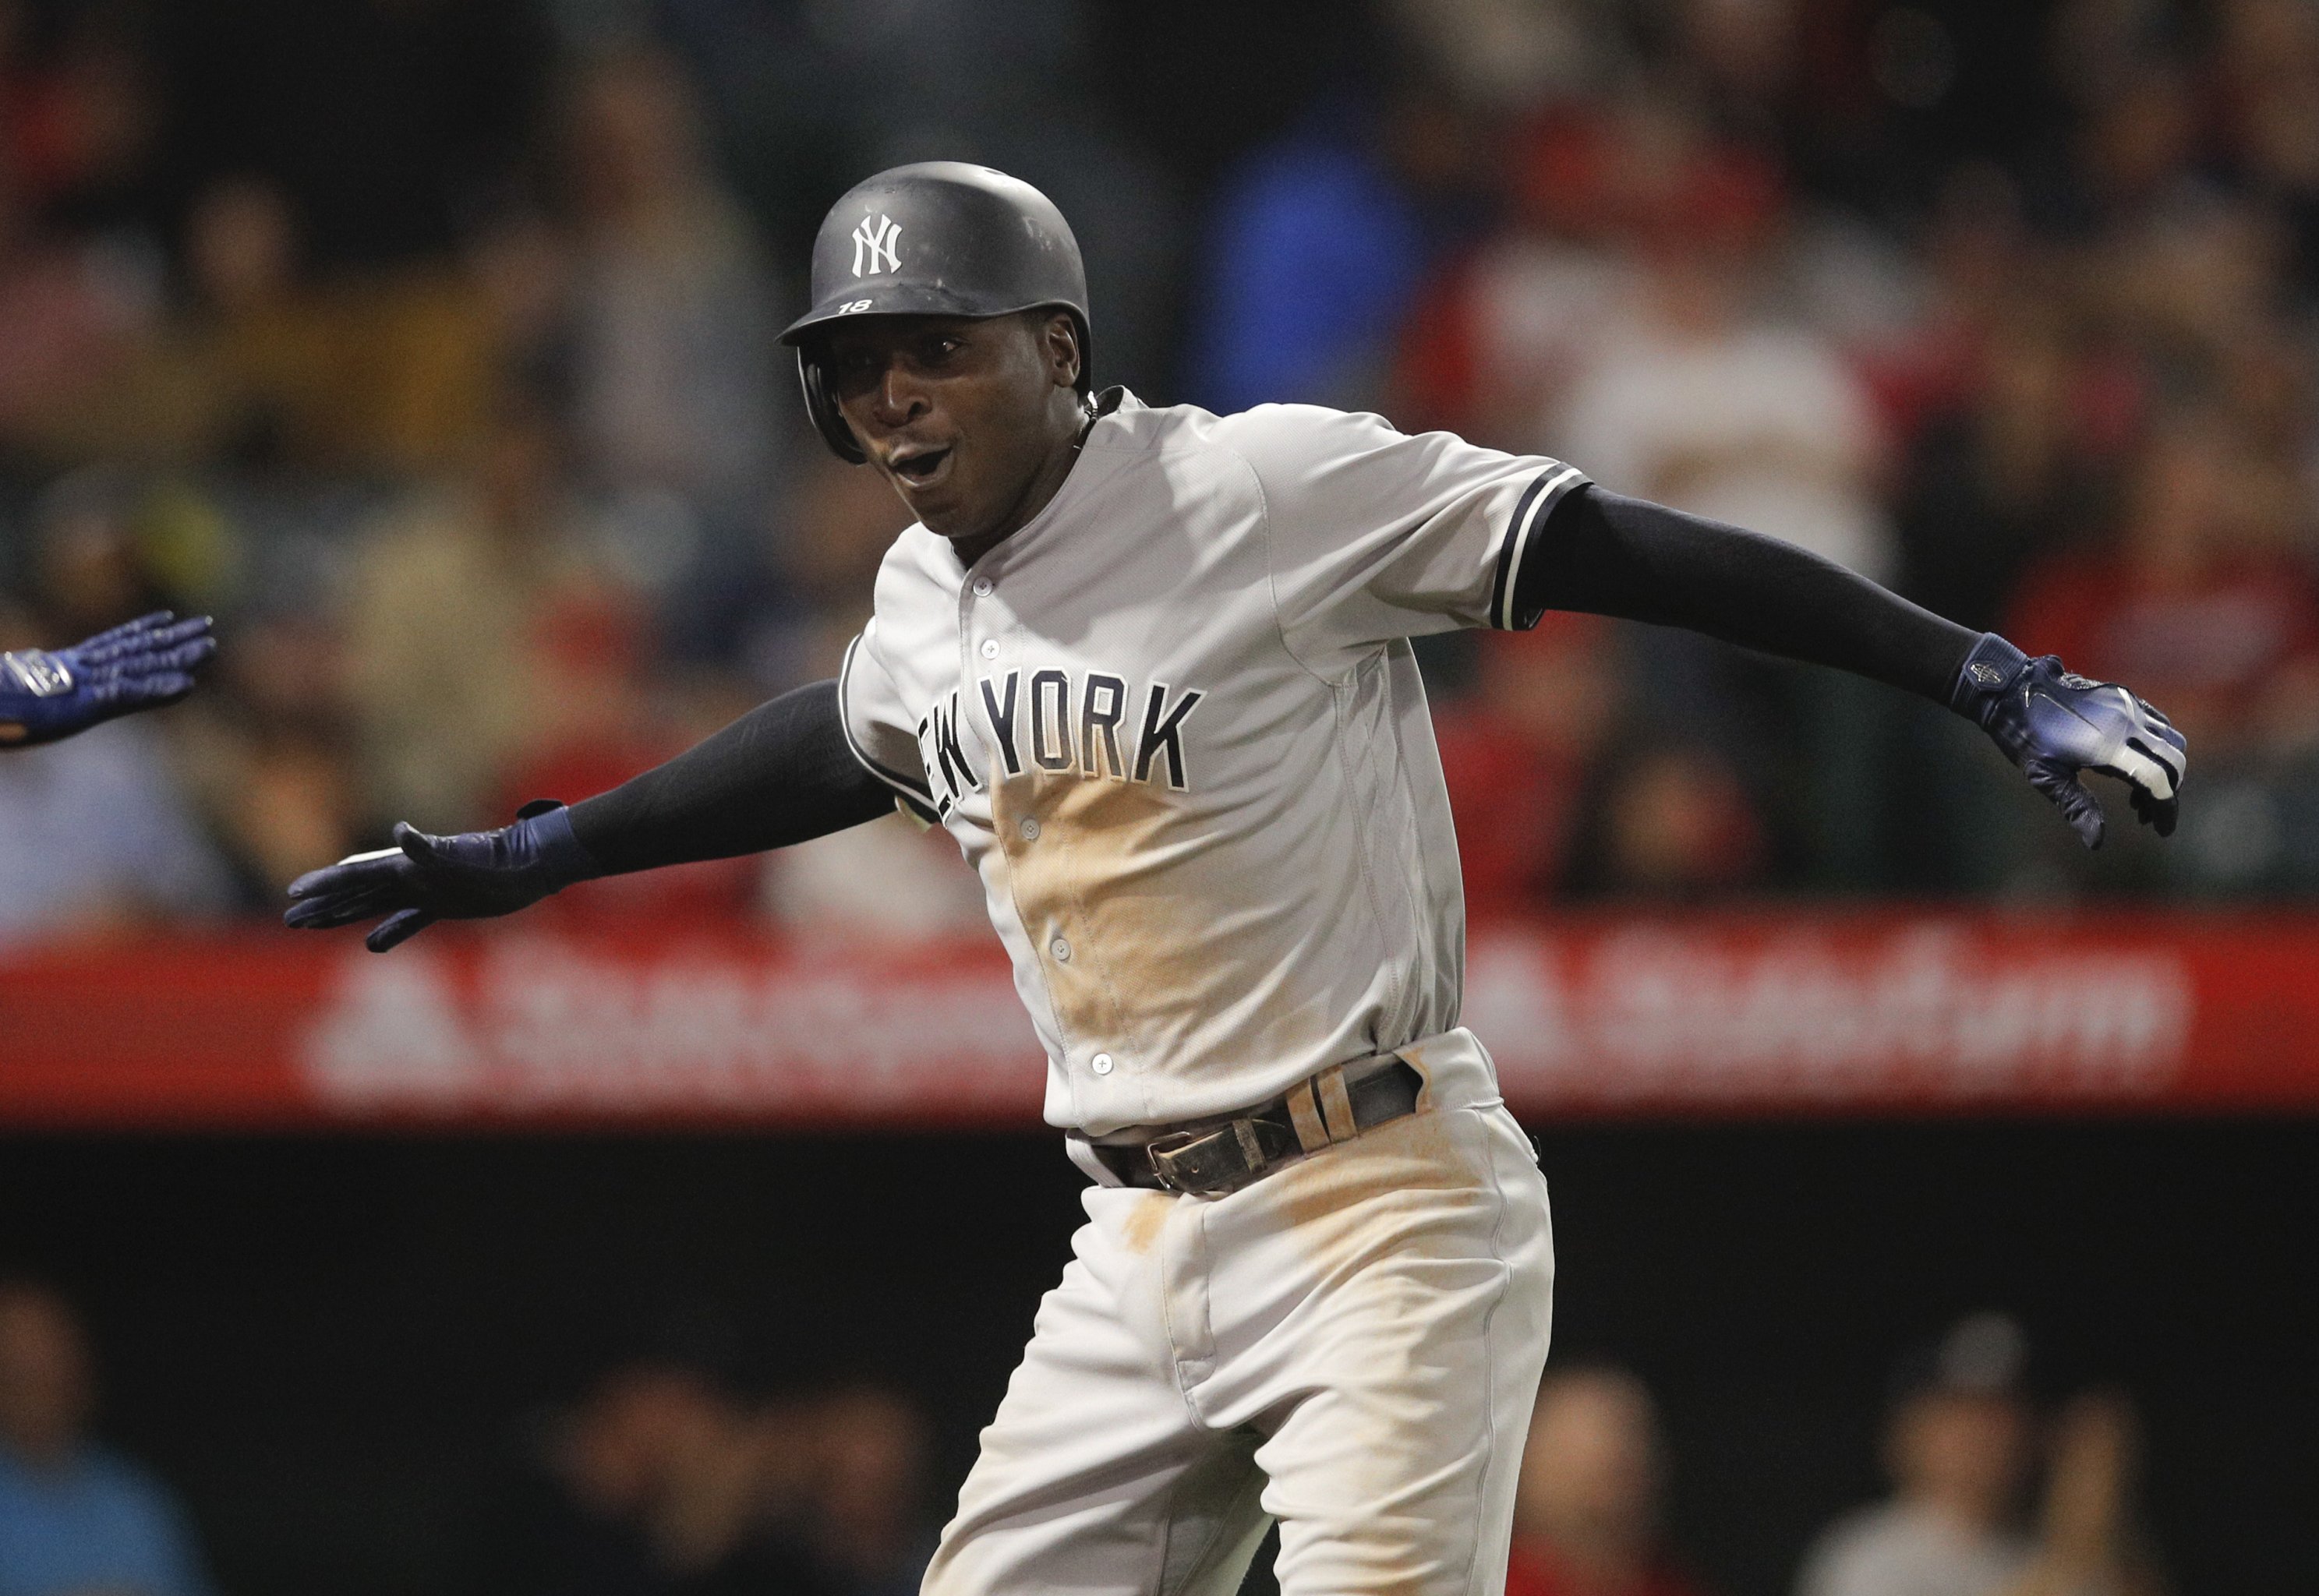 Didi Gregorius on pace to do something Derek Jeter never did … win